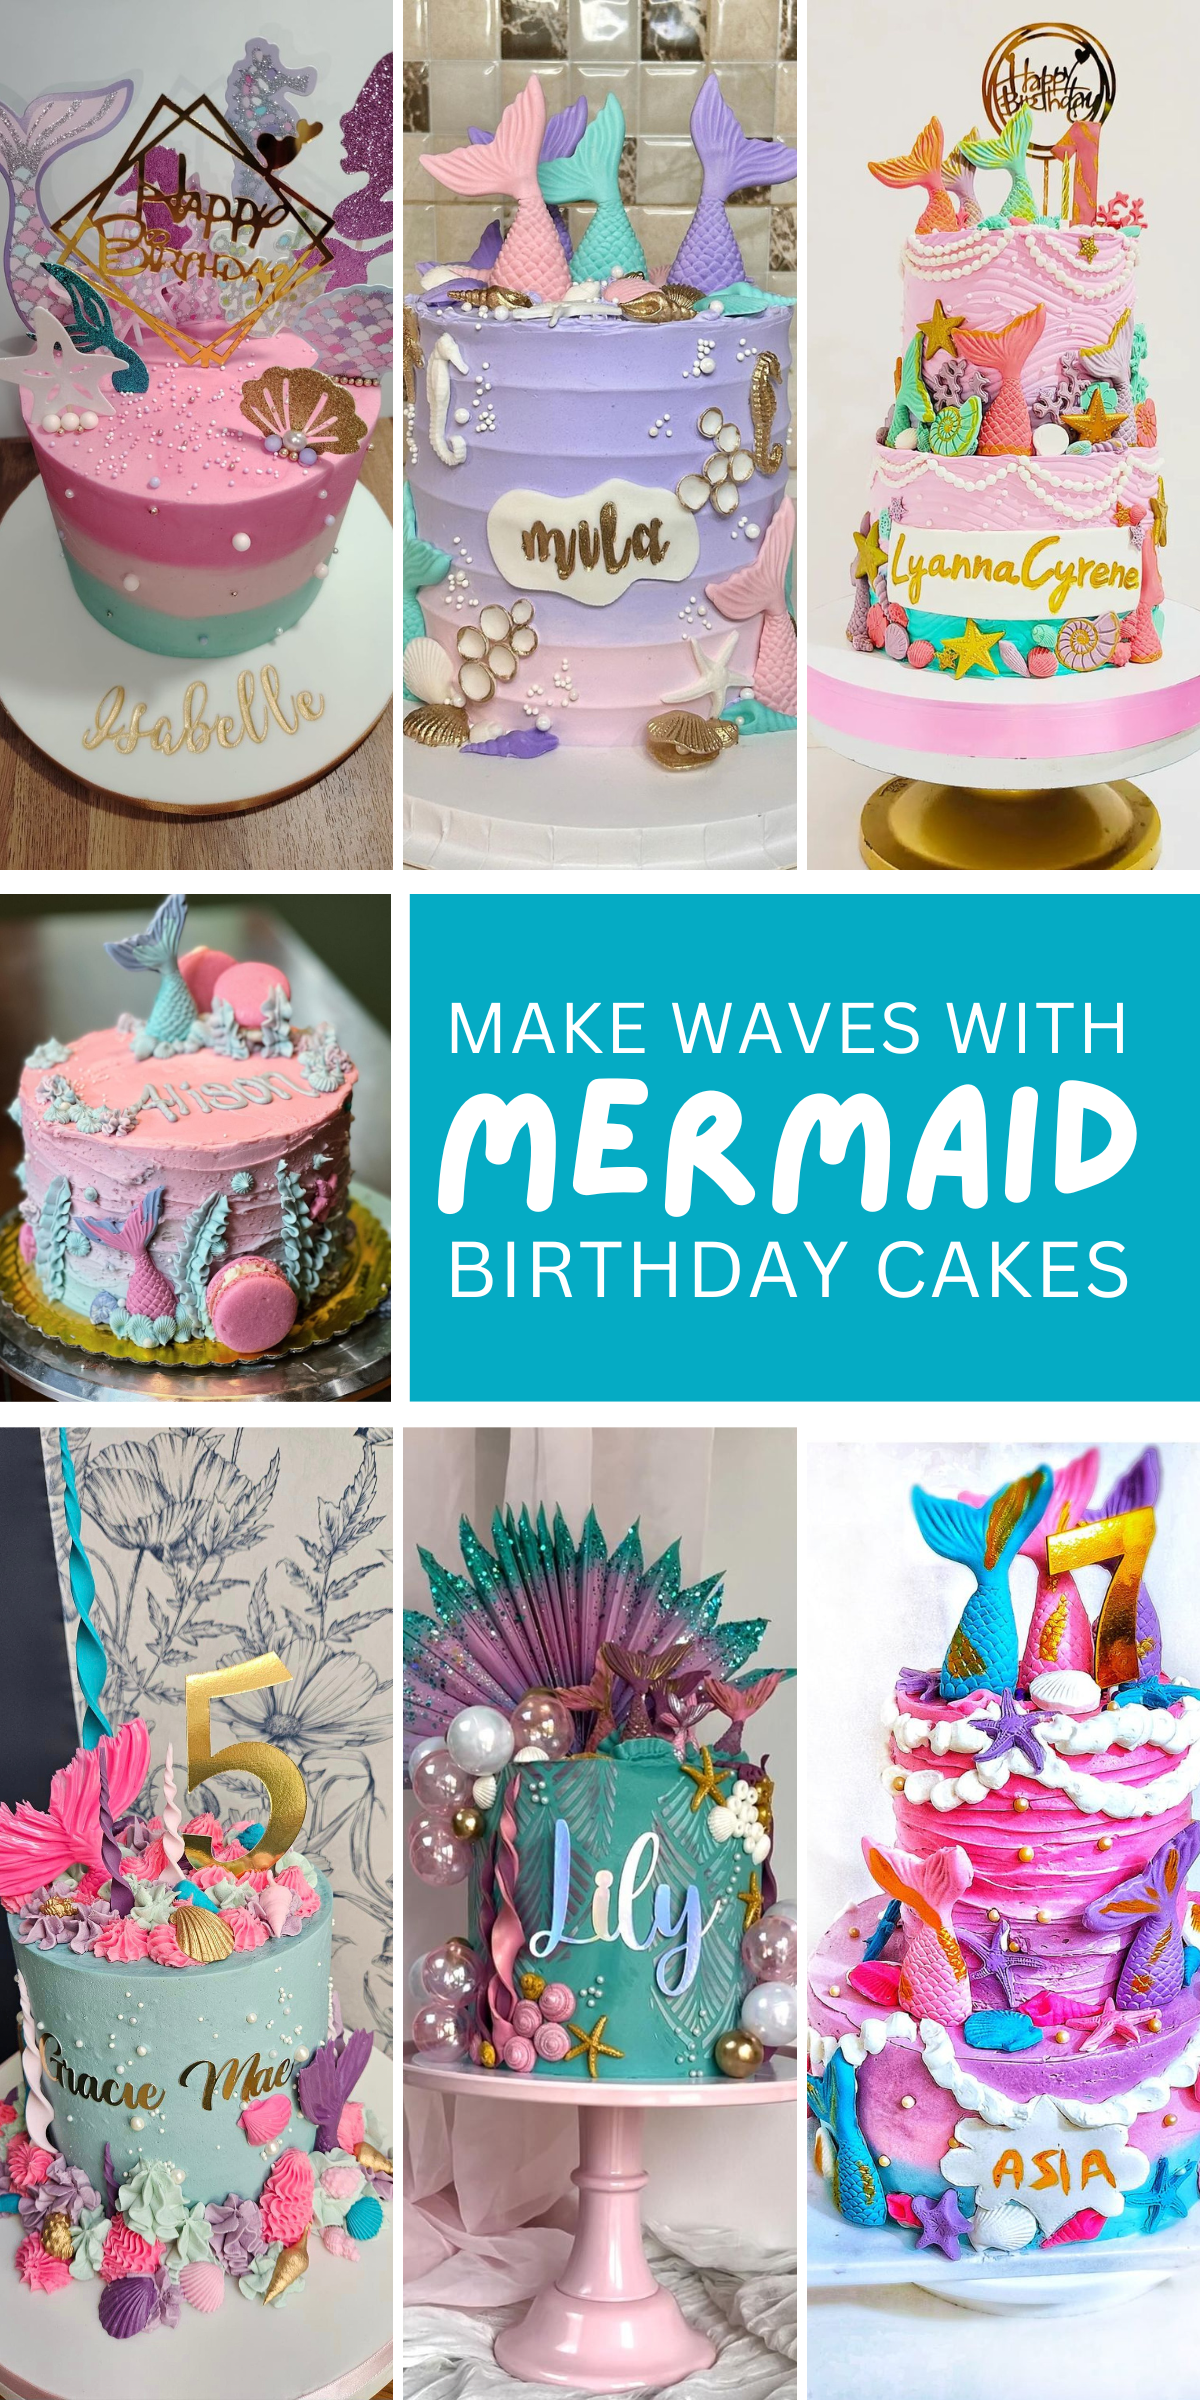 🧜🏻‍♀️🐚🎂 Dive into a collection of beautiful and whimsical cake designs that promise to make your mermaid-themed party unforgettable.